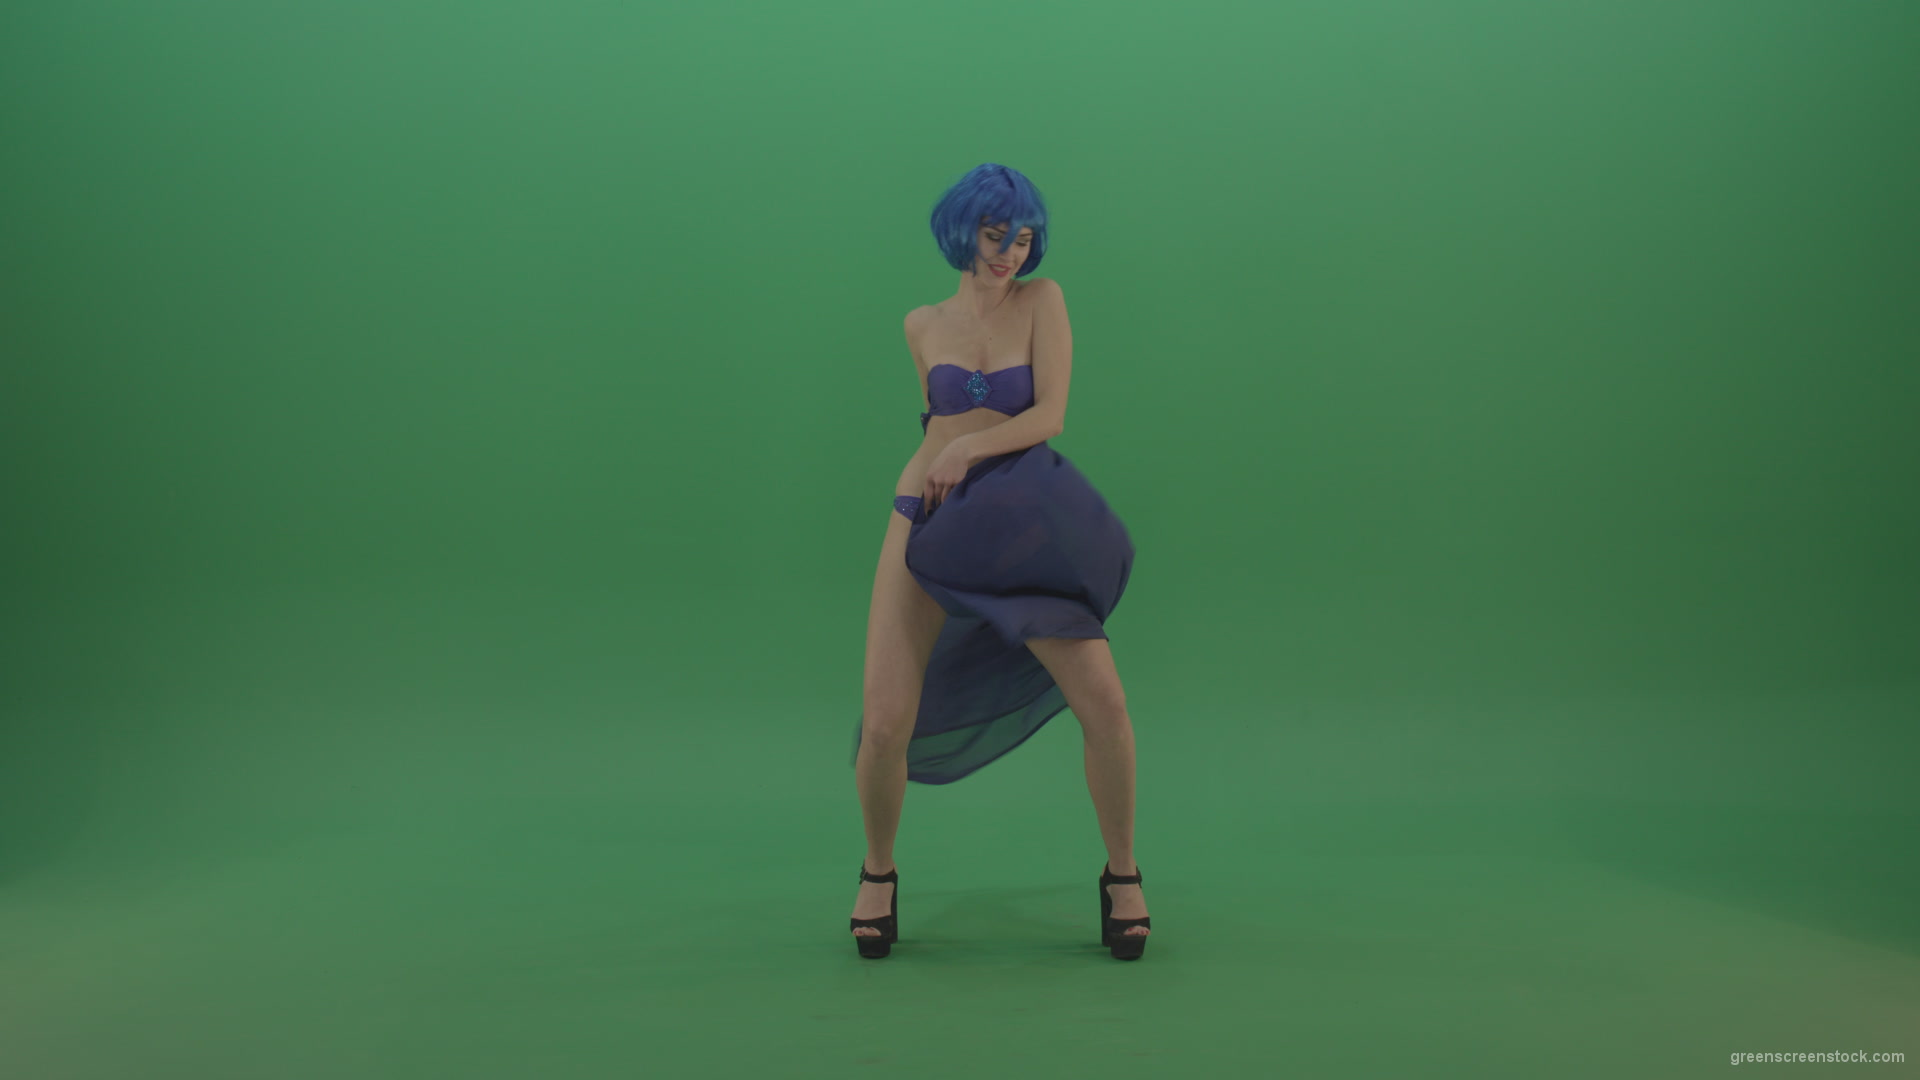 Full-size-erotic-young-girl-dancing-go-go-with-blue-dress-curtain-on-green-screen_007 Green Screen Stock